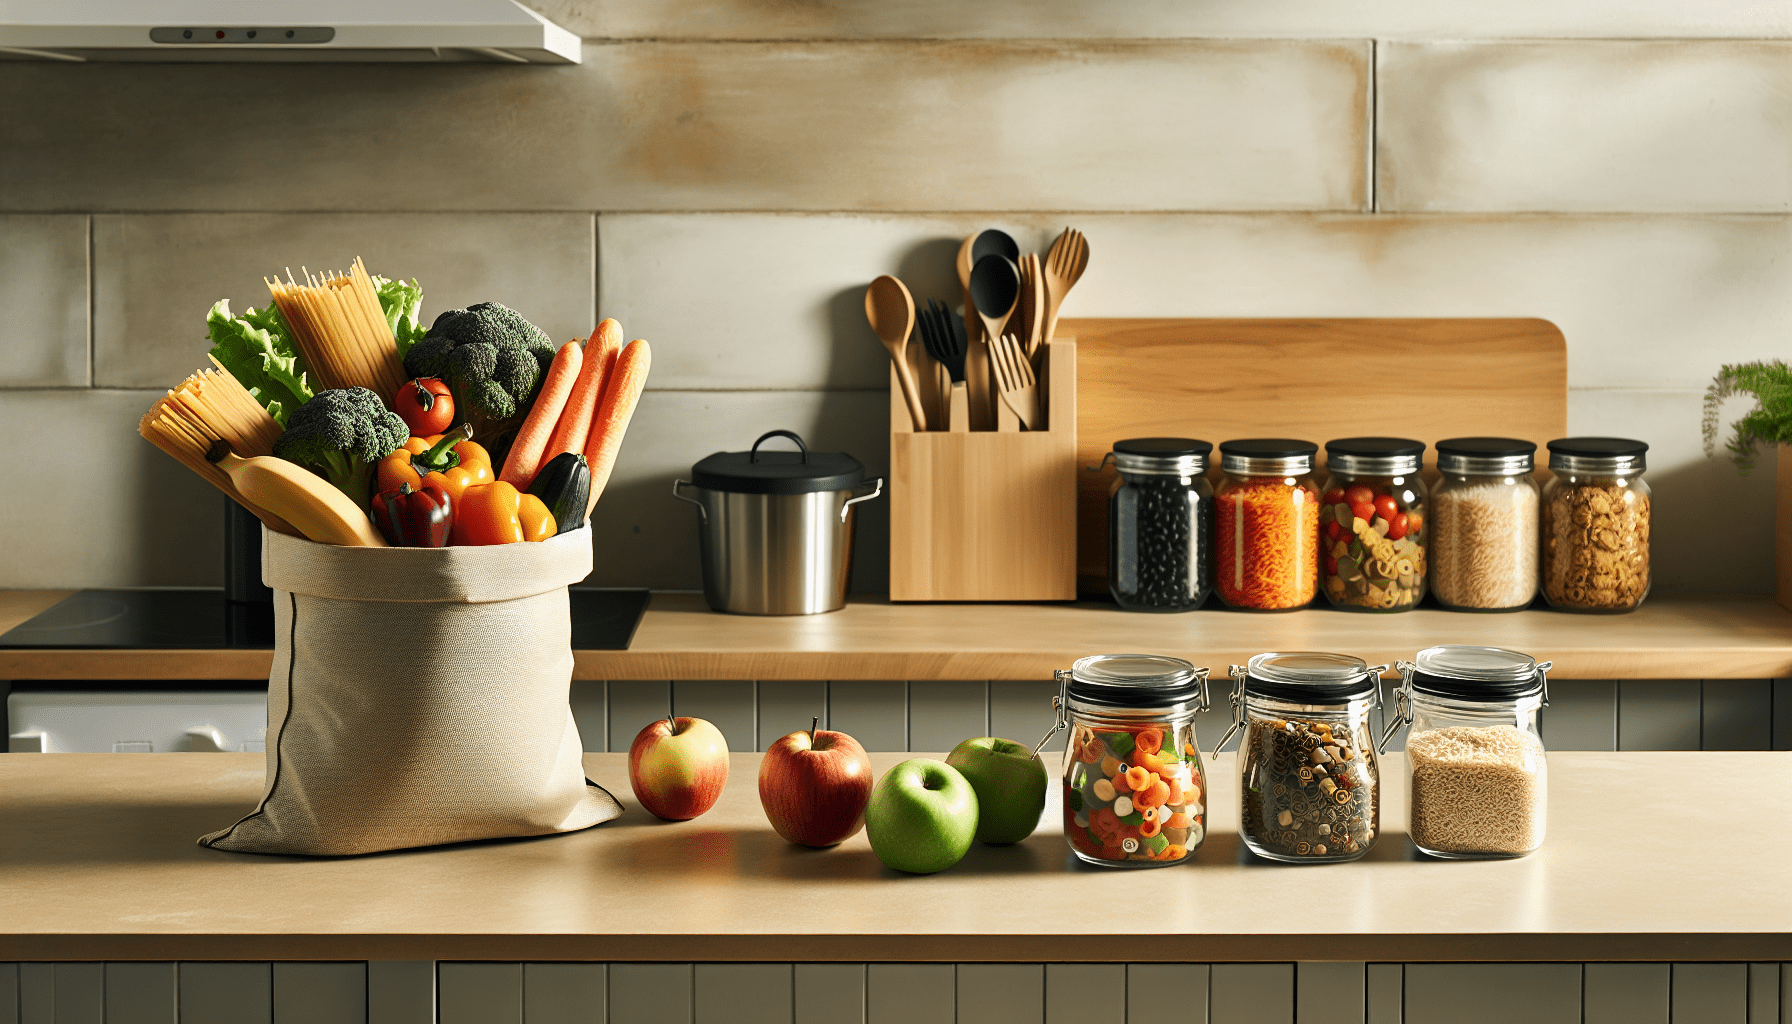 How Can I Reduce Food Waste At Home?